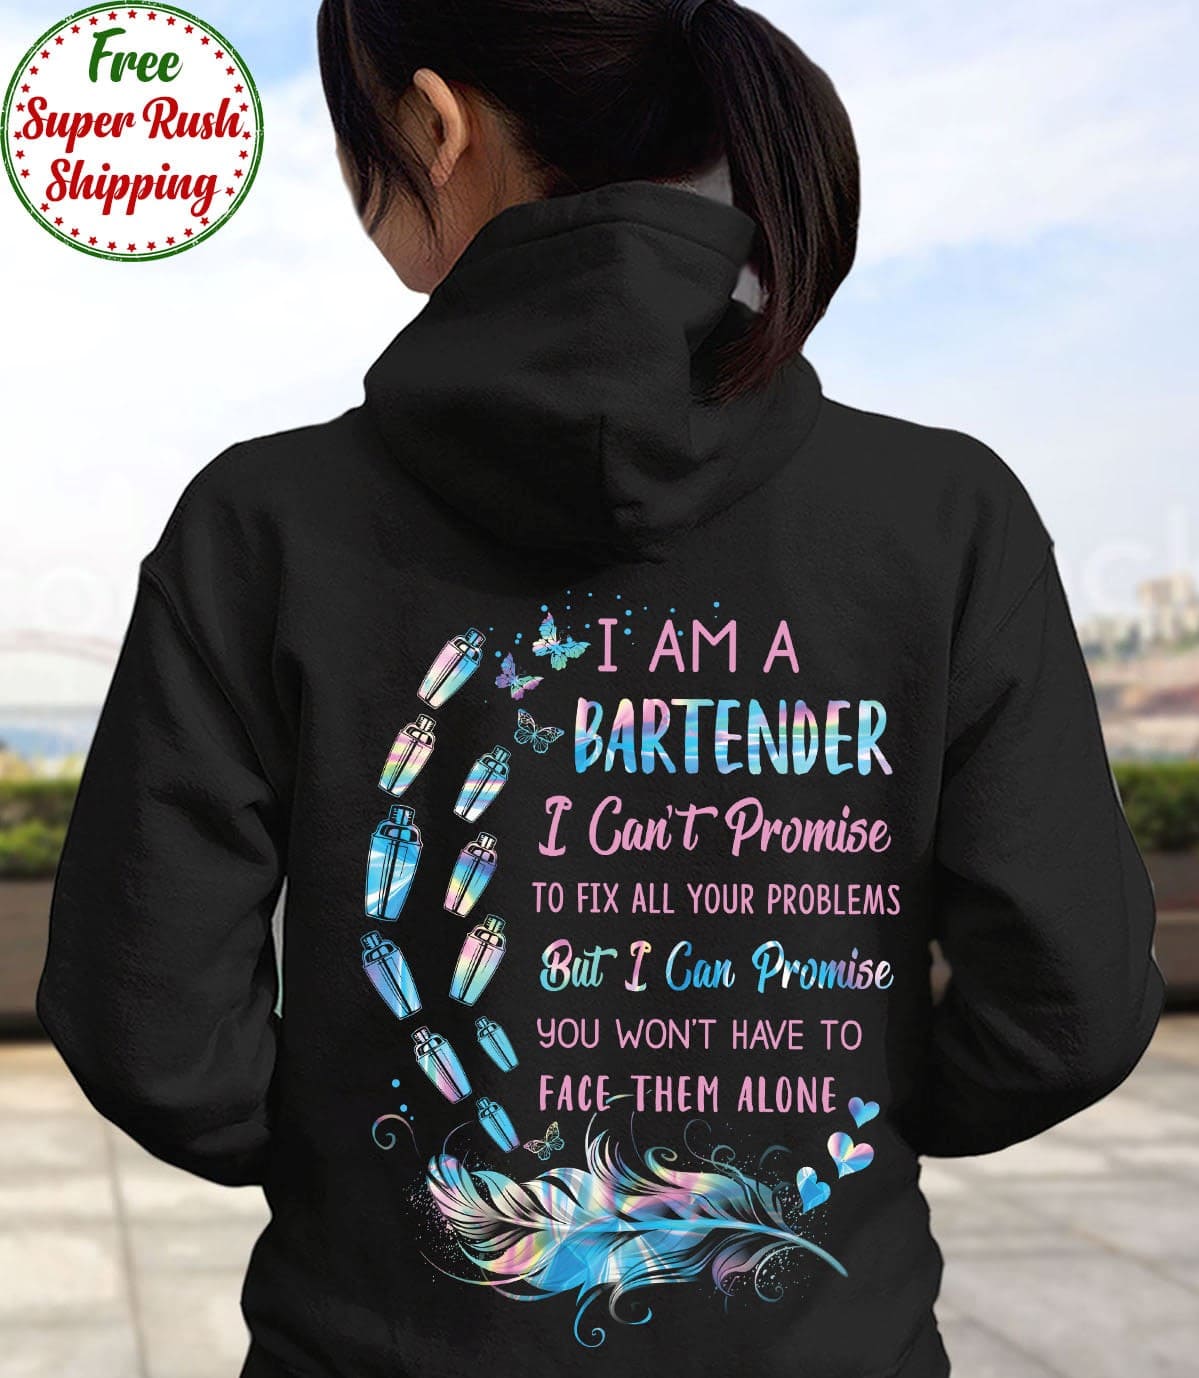 Bartender Job - I am a bartender practitioner i can't promise to fix all your problems